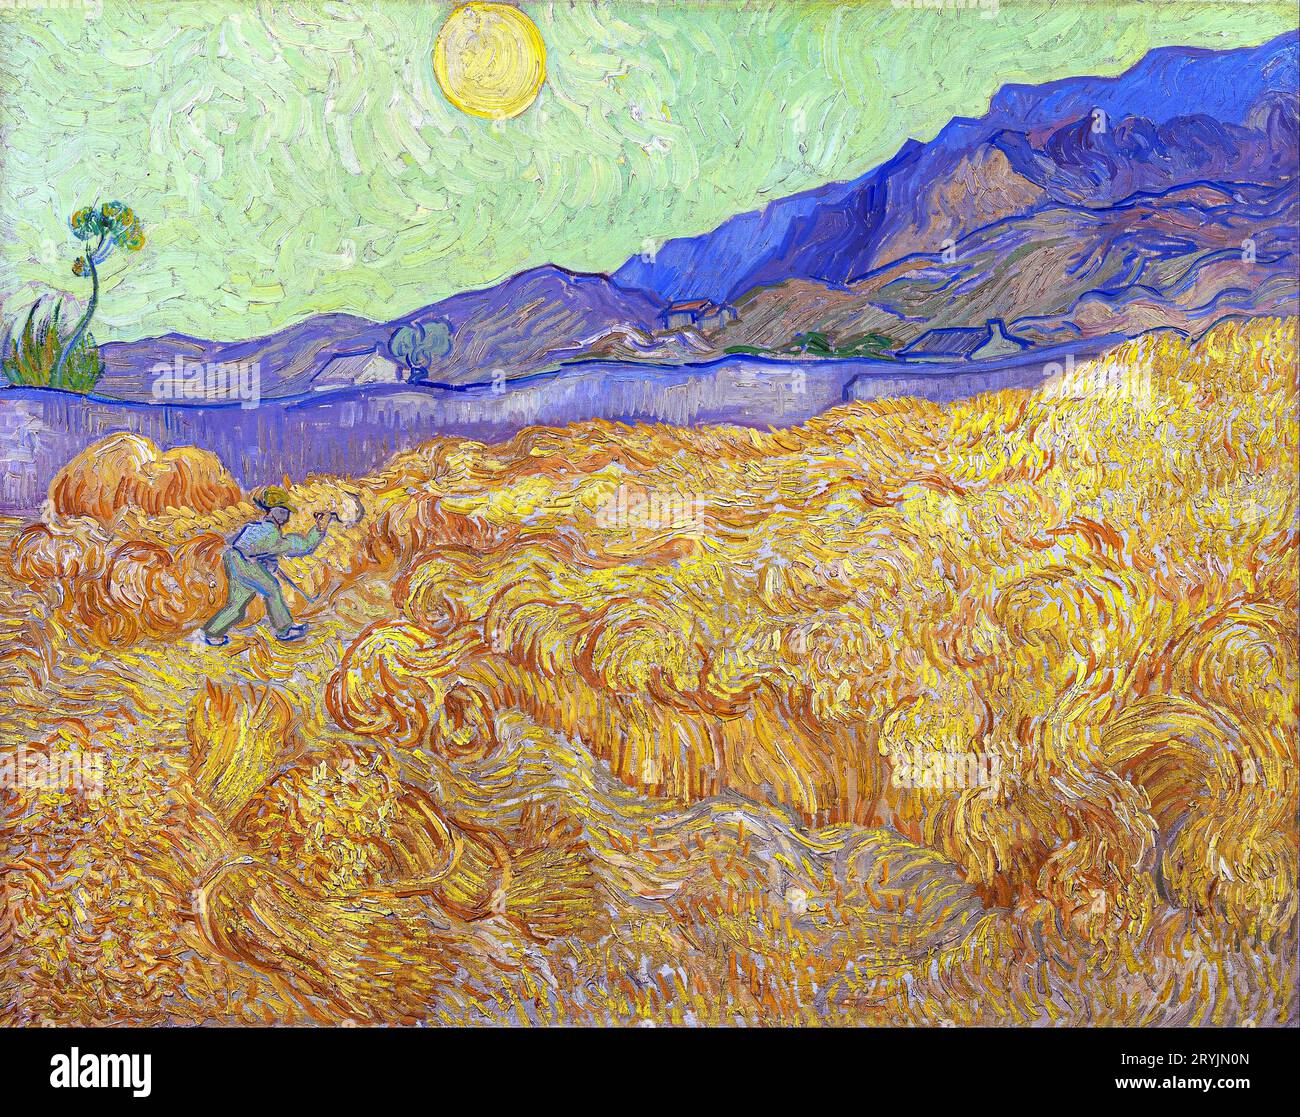 Vincent van Gogh - Wheatfield with a reaper Stock Photo